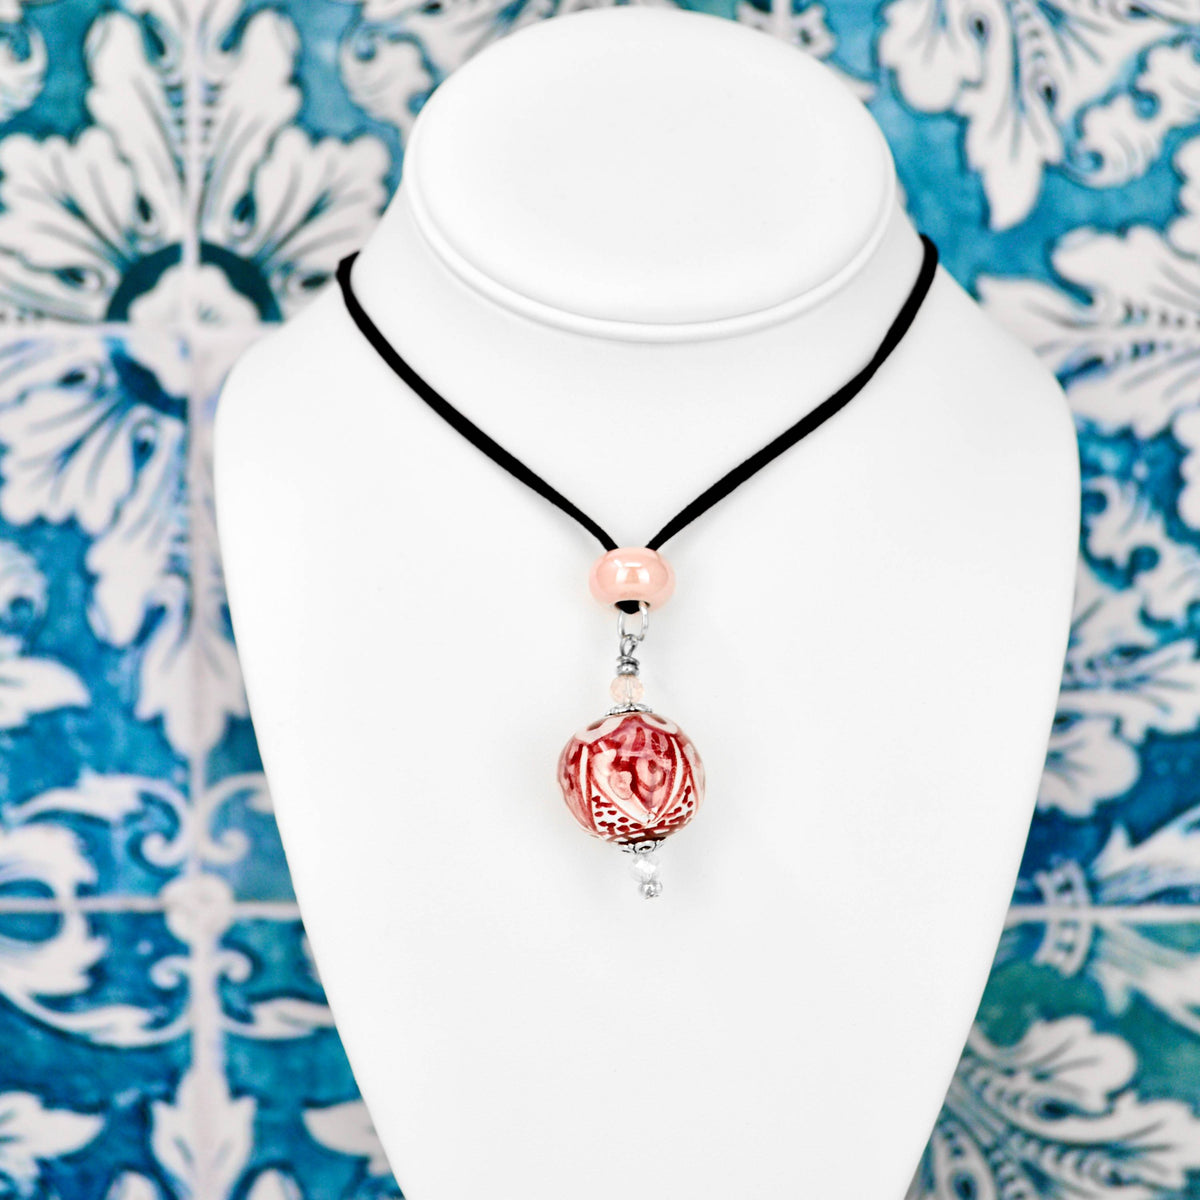 Italian Ceramic Diana Necklace, Red and Pink, Hand-Crafted In Italy - My Italian Decor